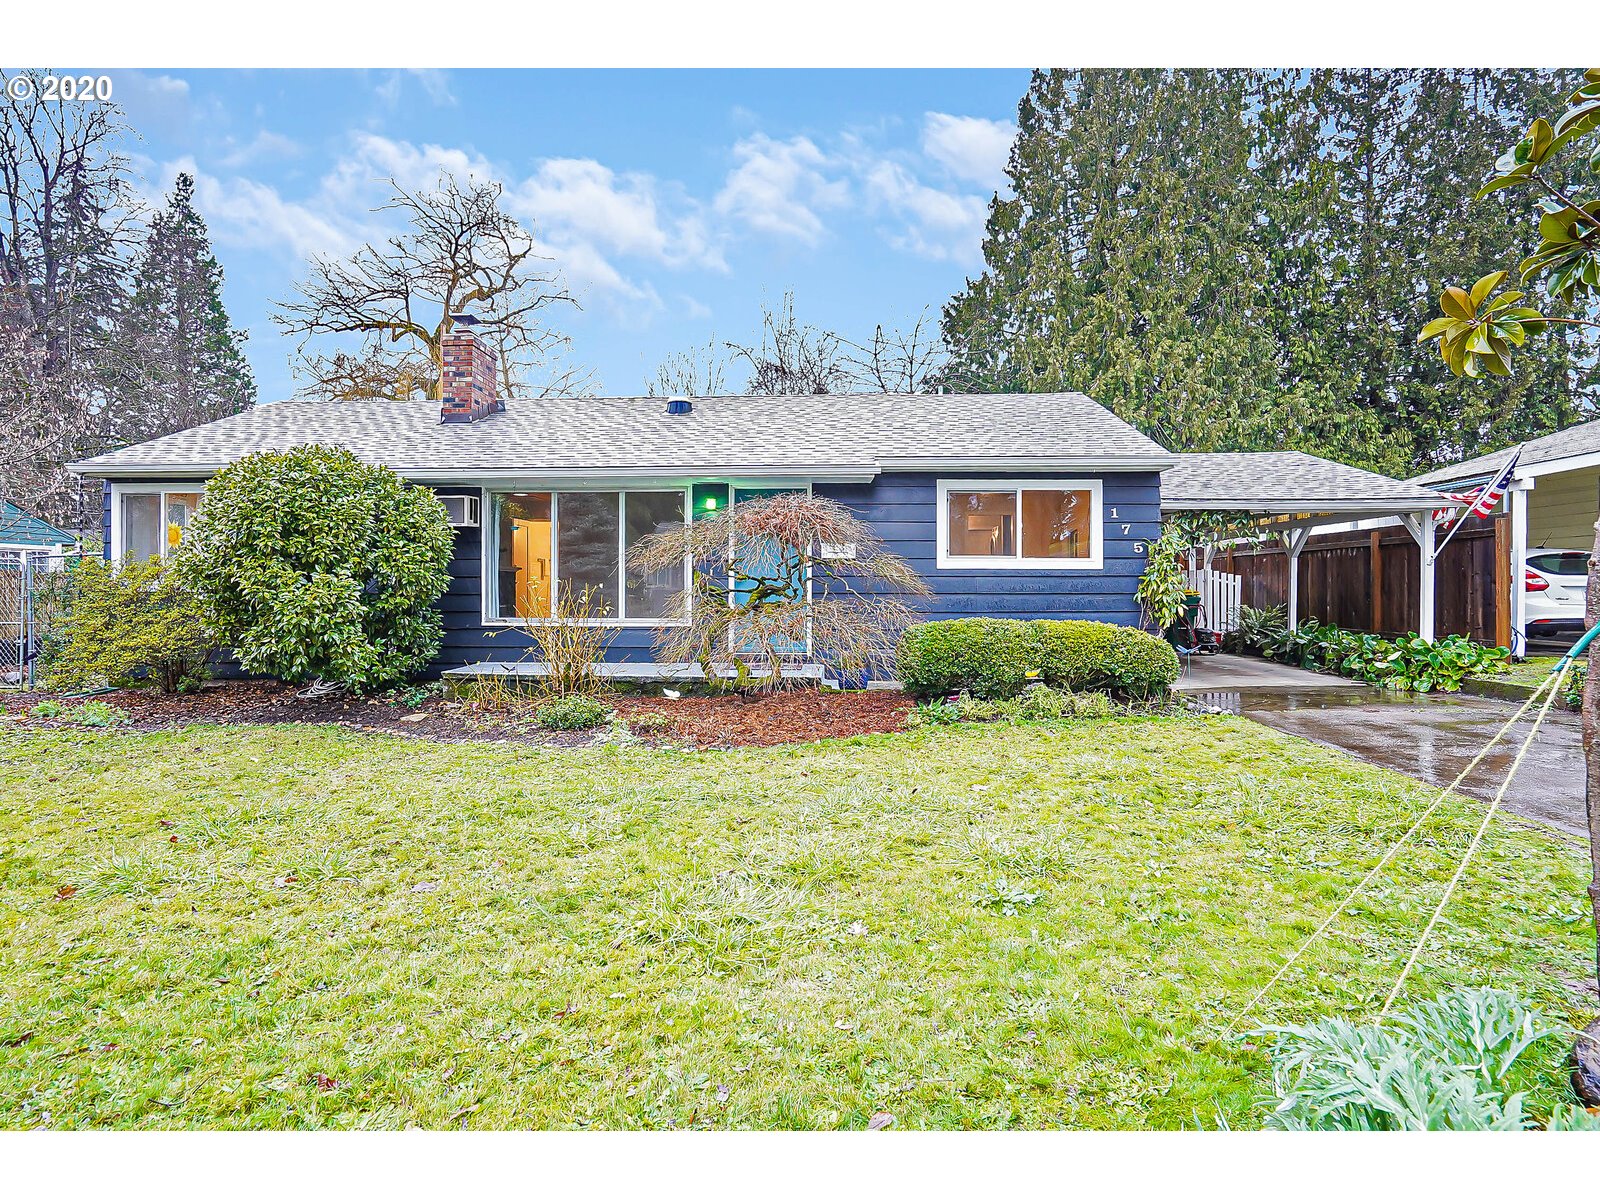 175 SW 138TH AVE (1 of 32)